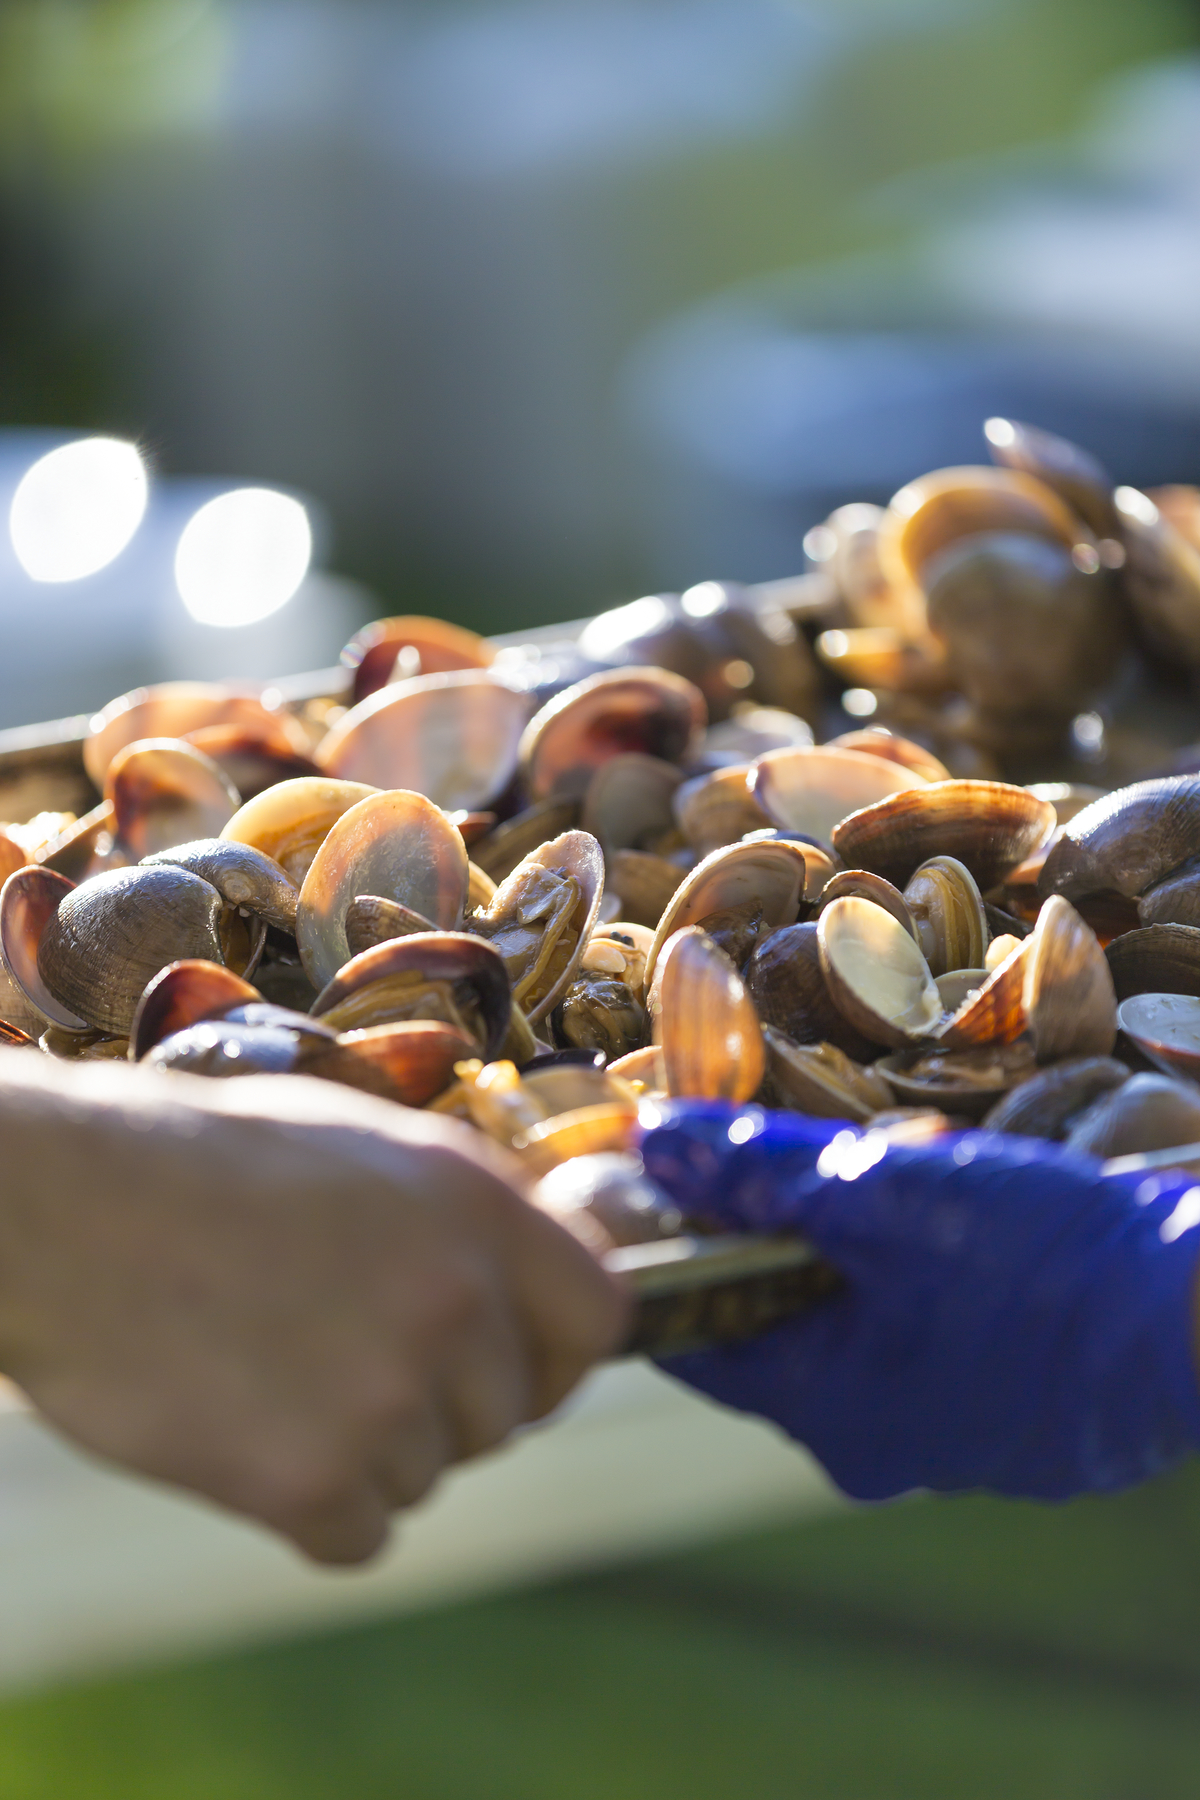 A plate of clams at the BC Shellfish & Seafood Festival in Comox